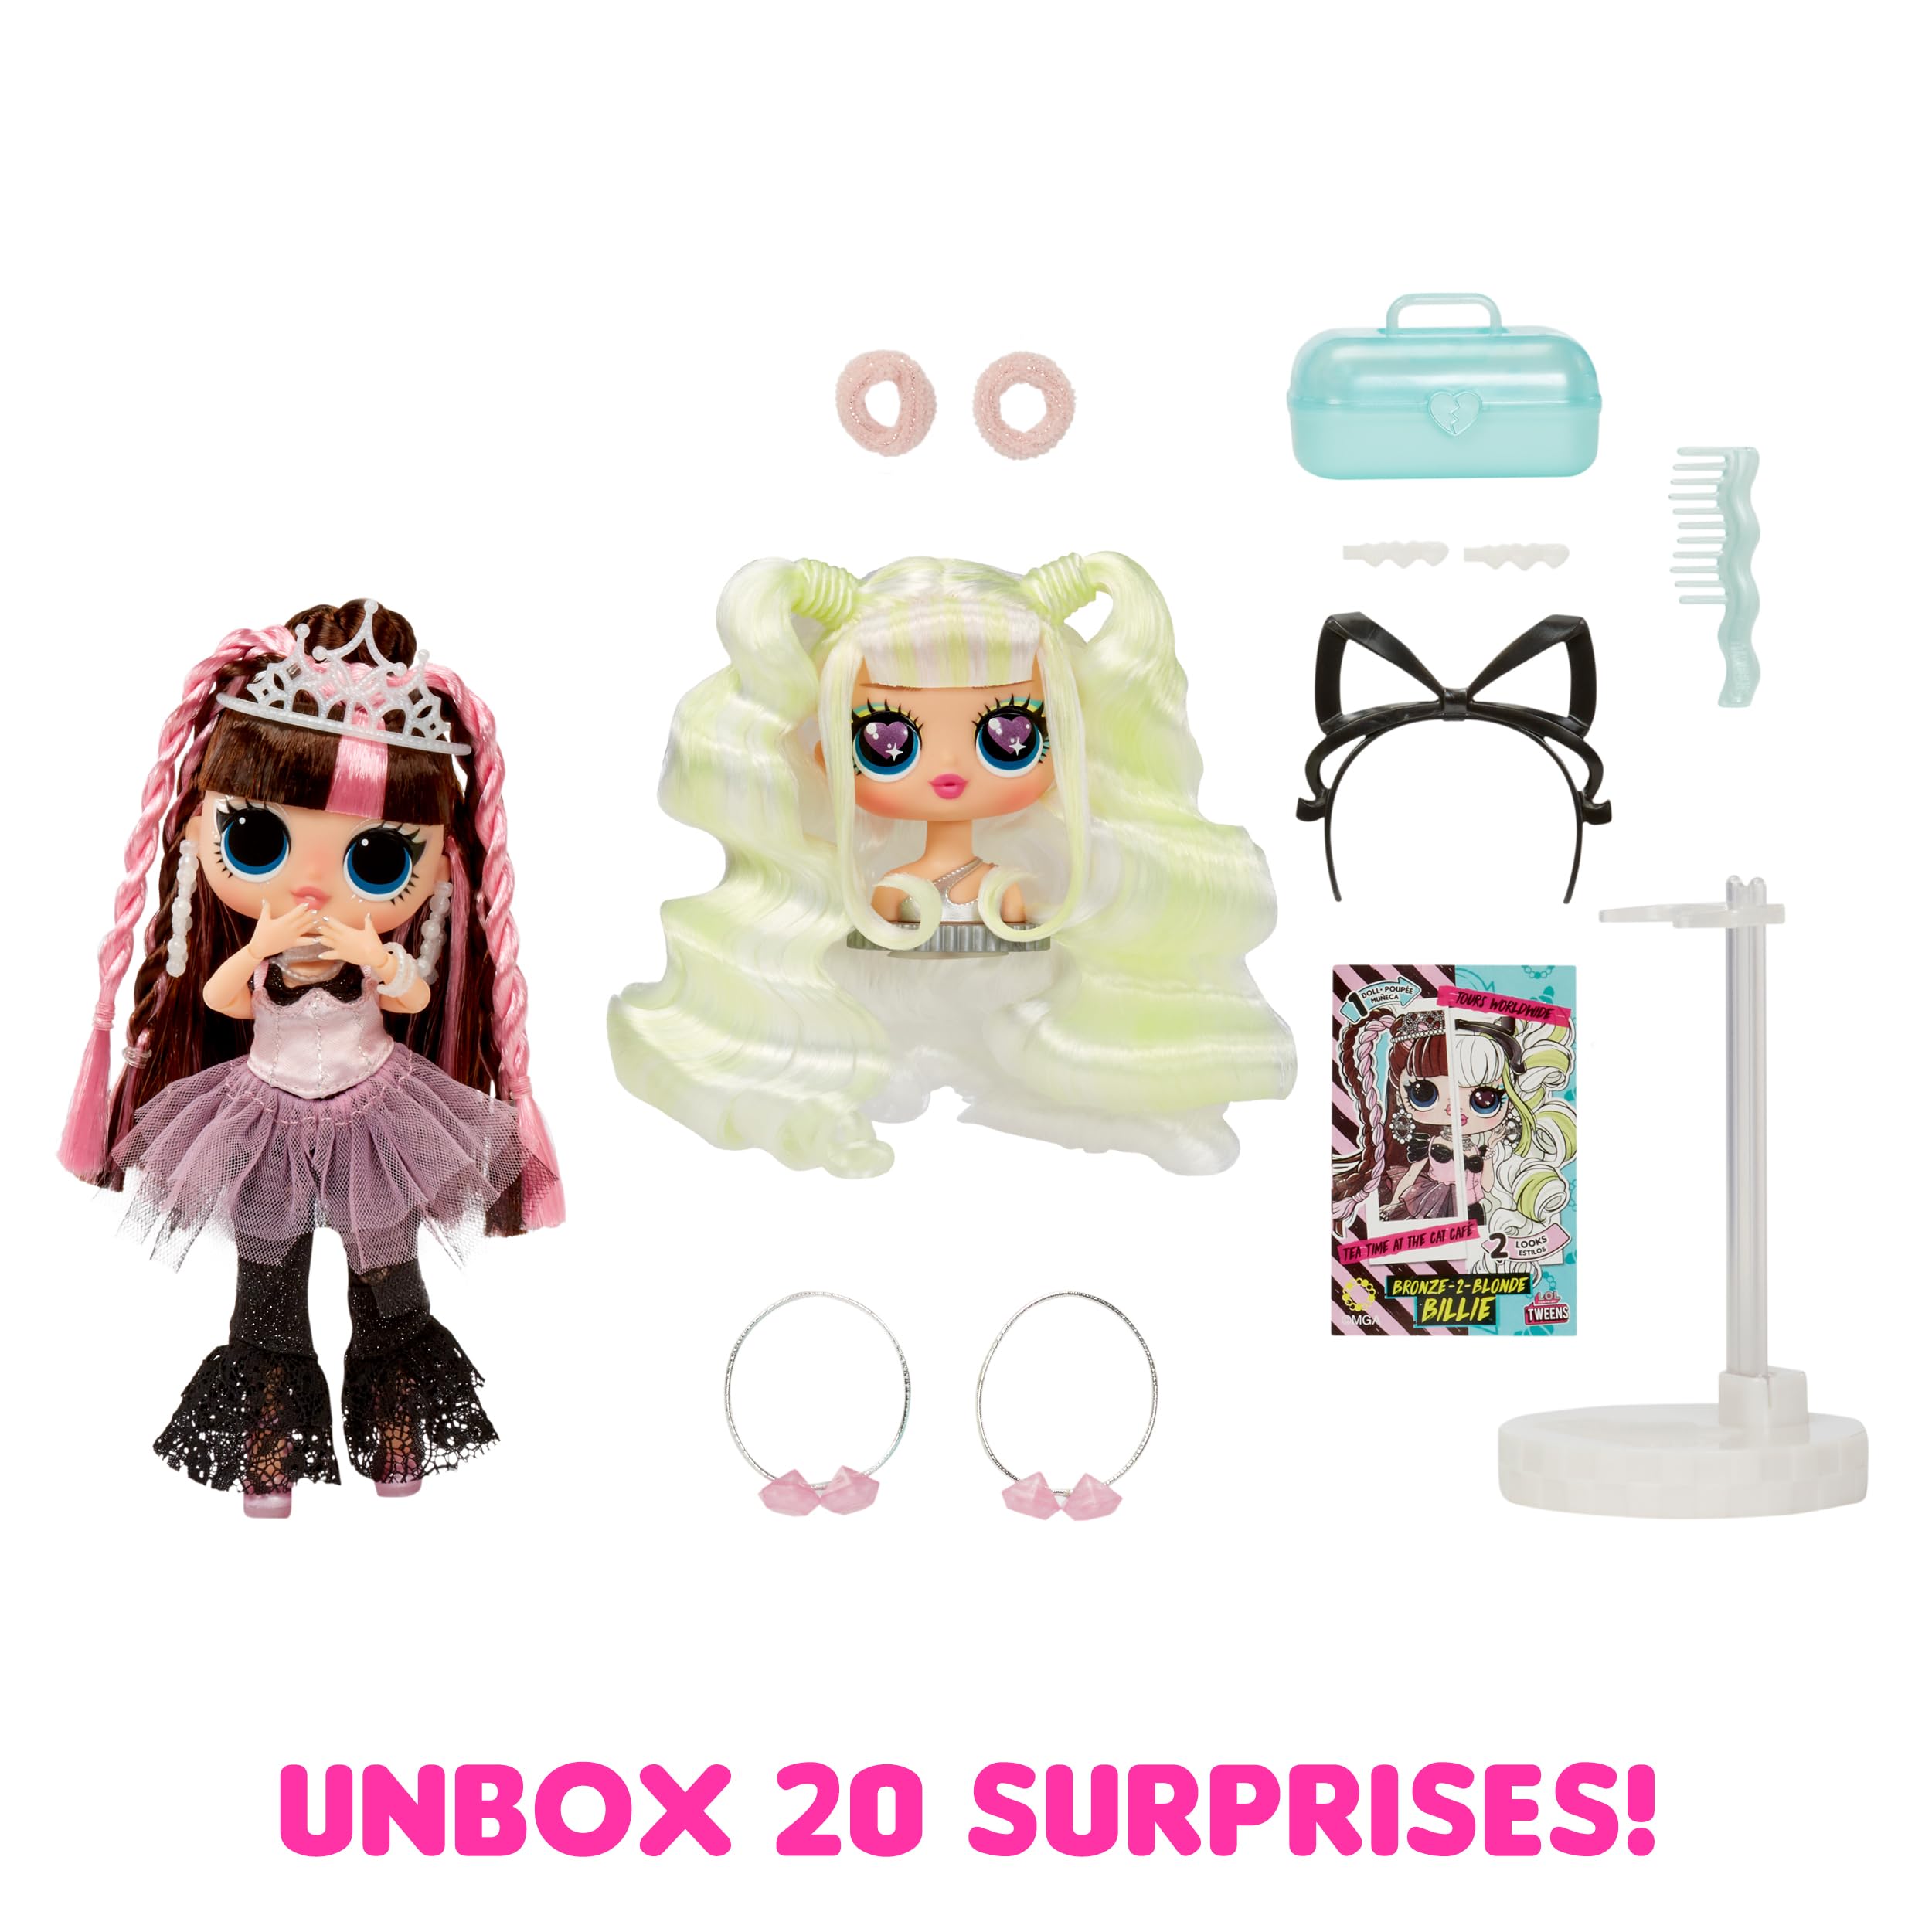 LOL Surprise Tweens Surprise Swap Bronze-2-Blonde Billie Fashion Doll with 20+ Surprises Including Styling Head and Fabulous Fashions and Accessories – Great Gift for Kids Ages 4+